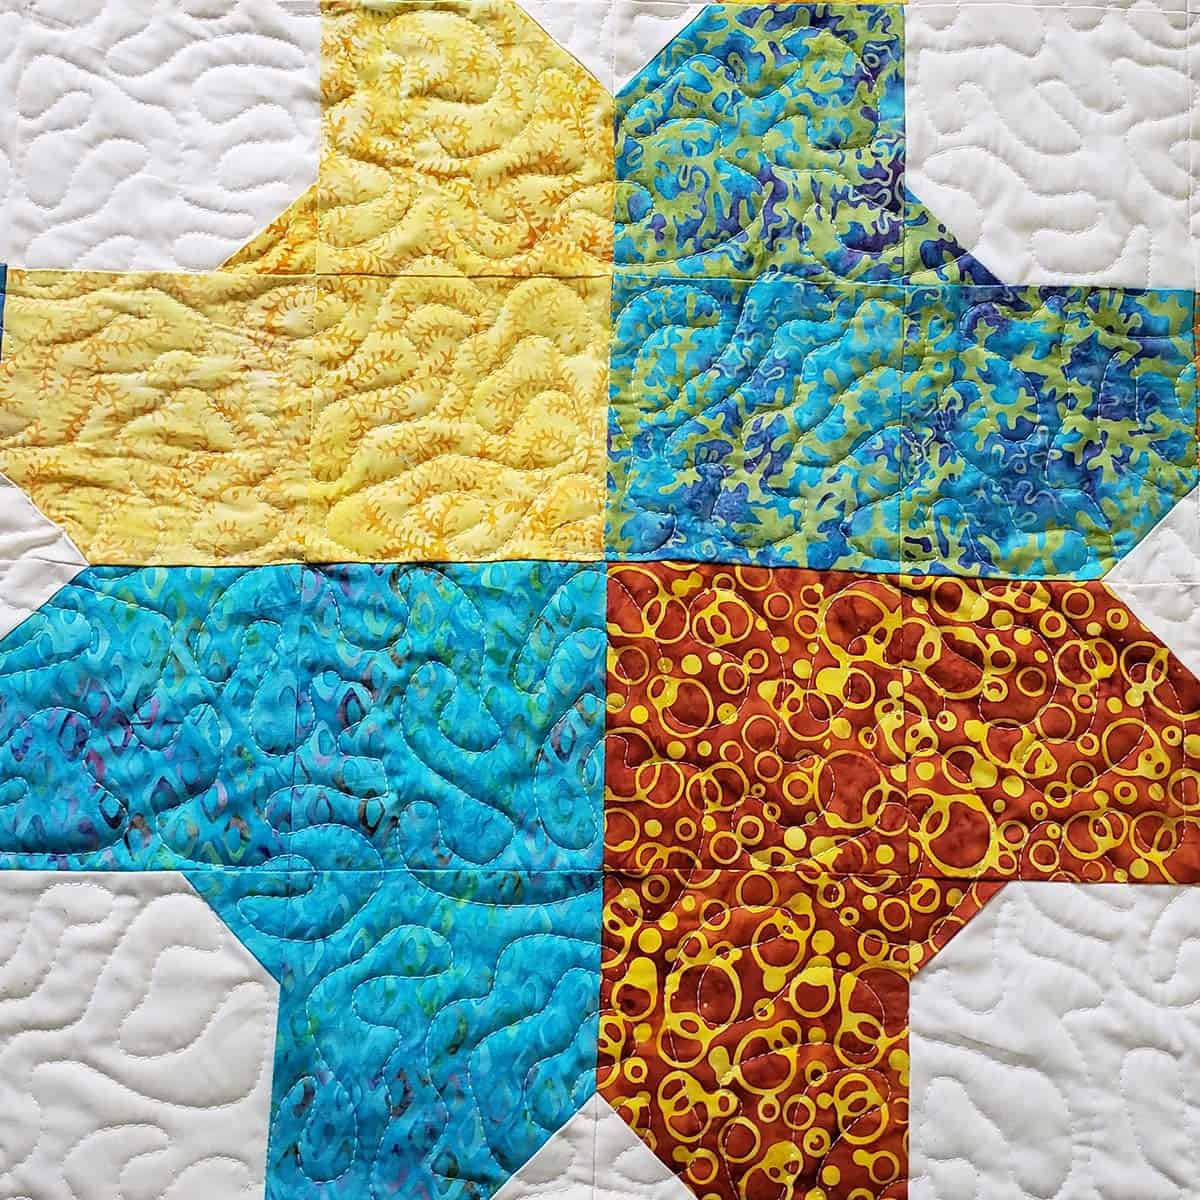 Strange looking design from the Morning Glory baby quilt